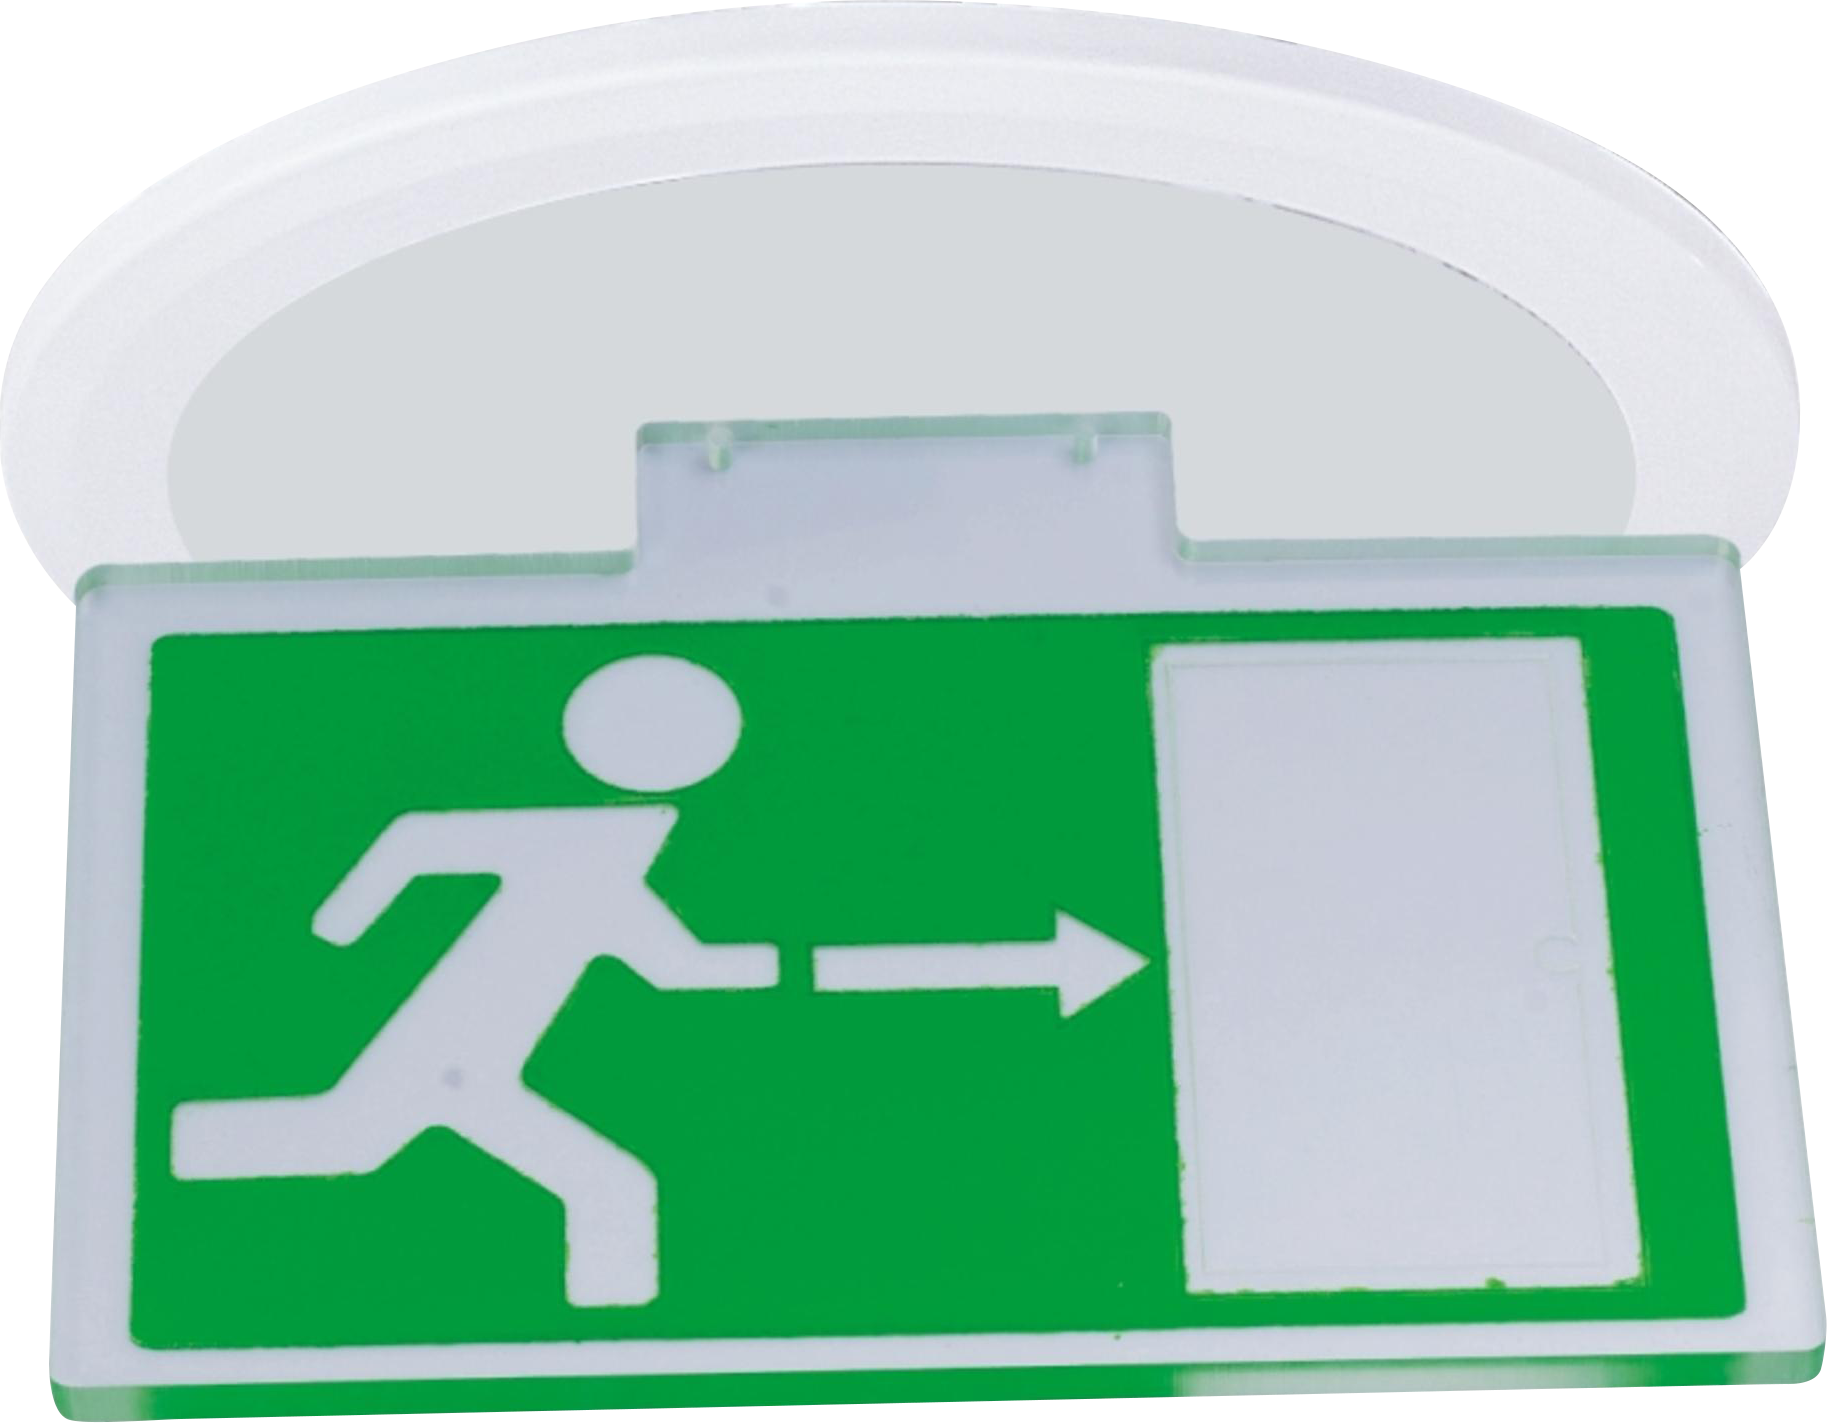 226mm Running Man Exit Sign Horizontal Accessory - PL226SIGN 